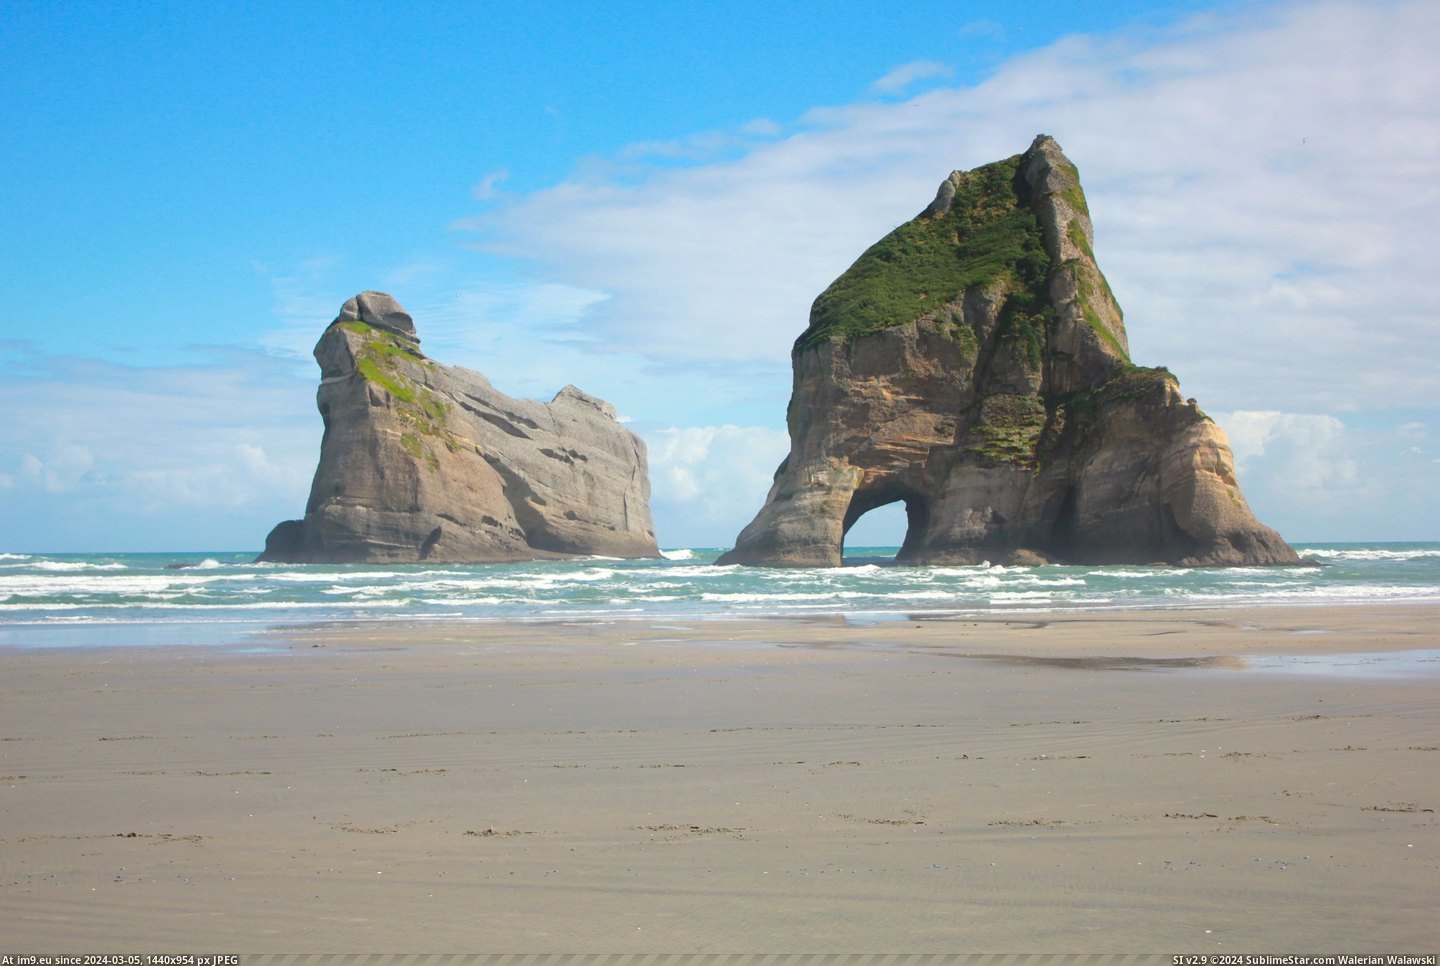 #Zealand #Islands #Puponga #3110x2073 #Archway [Earthporn] Puponga, Archway islands, New Zealand [3110x2073] Pic. (Изображение из альбом My r/EARTHPORN favs))